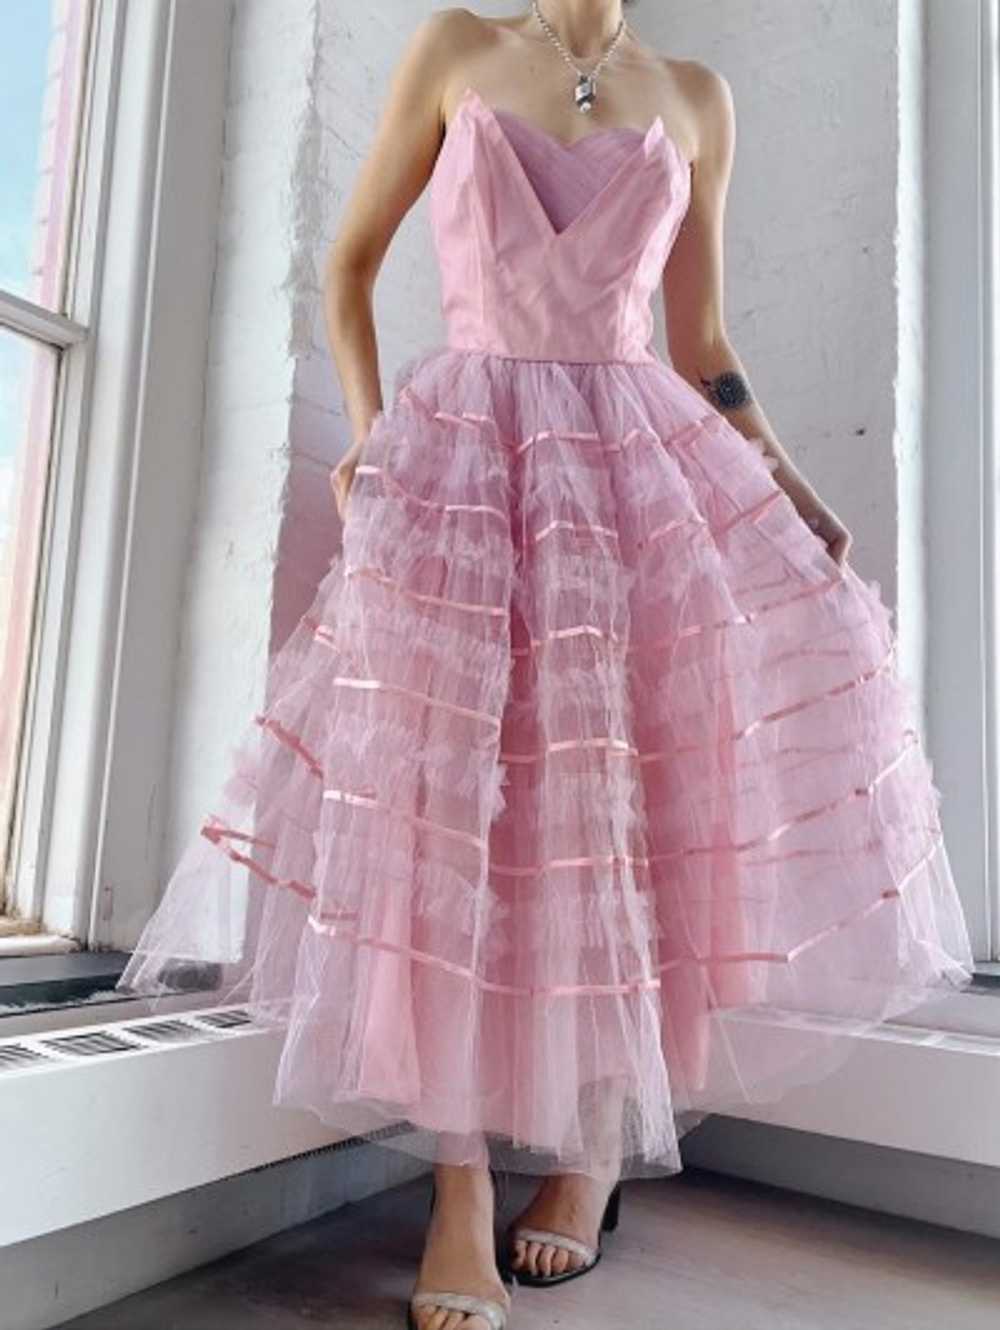 50s pink tulle strapless dress - image 3